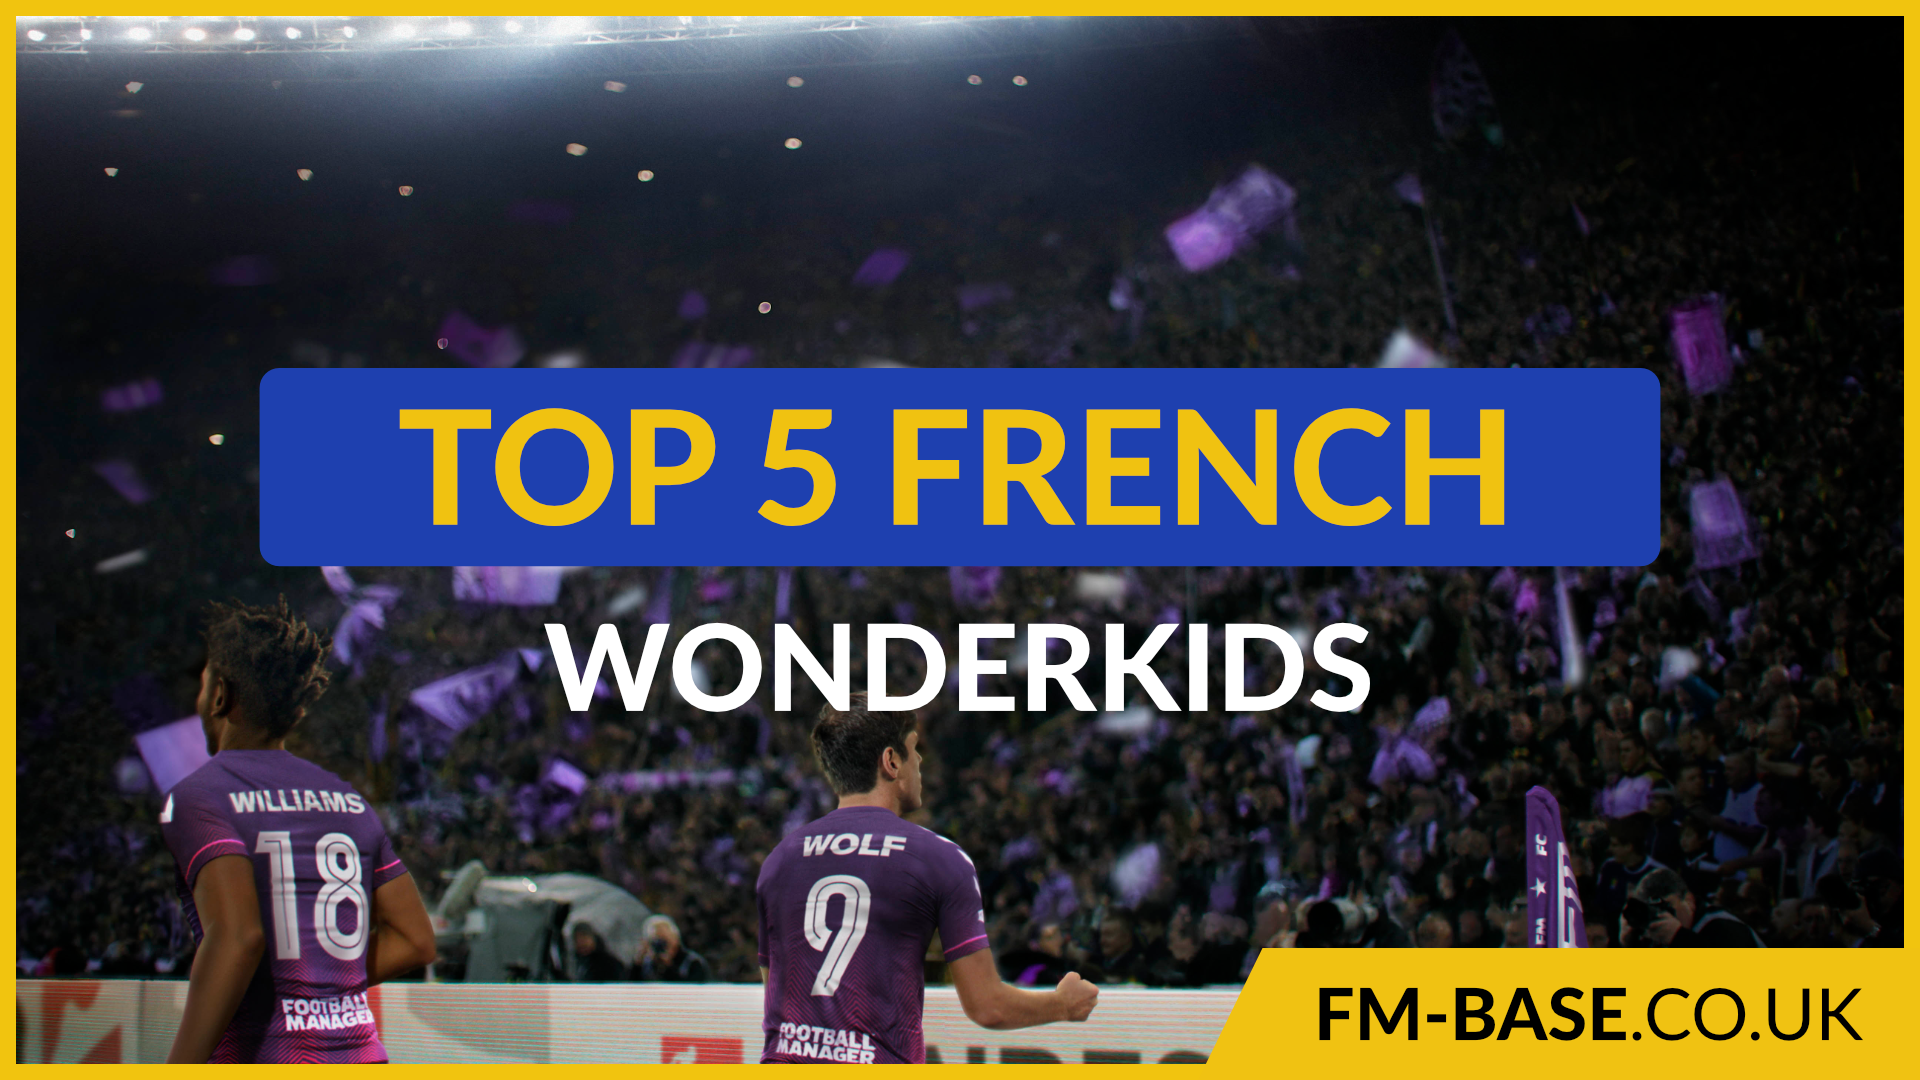 The Top 5 French Wonderkids in Football Manager 2022